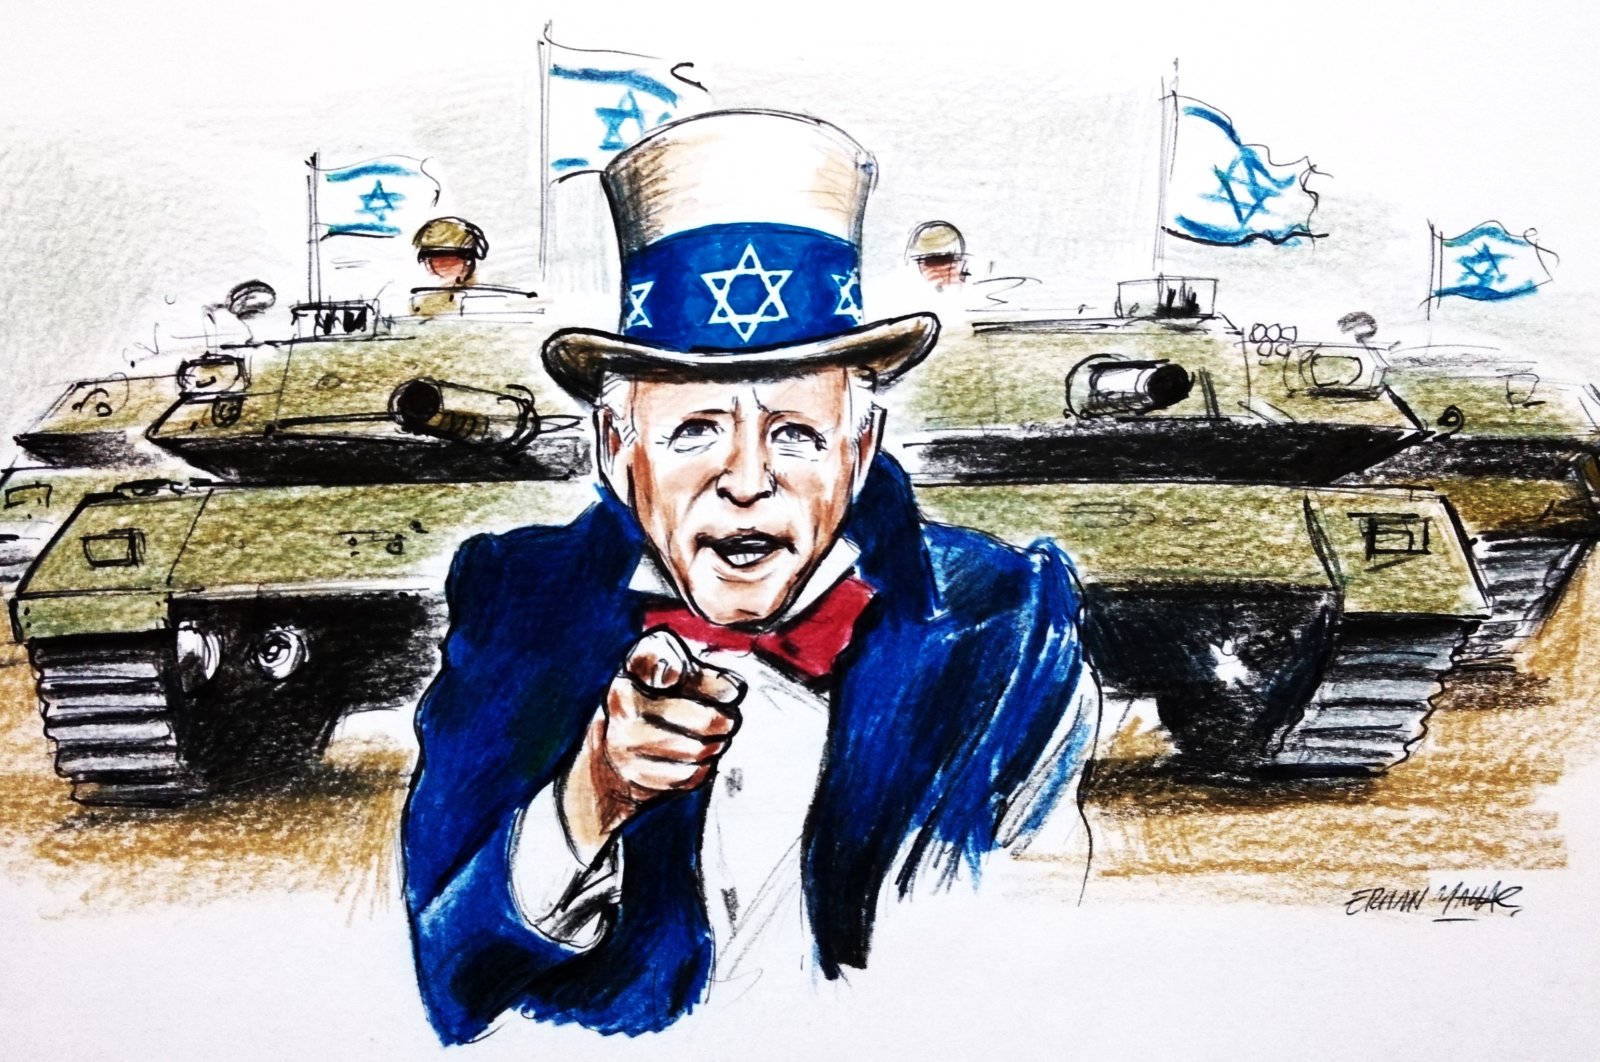 &quot;While the White House routinely champions values such as peace, freedom and human rights, its staunch support of Israel highlights a glaring contradiction between American rhetoric and action. Such inconsistencies and double standards, as exemplified in Washington’s position toward the Ukraine war, further corrode trust in the international order under U.S. leadership.&quot; (Illustration by Erhan Yalvaç)